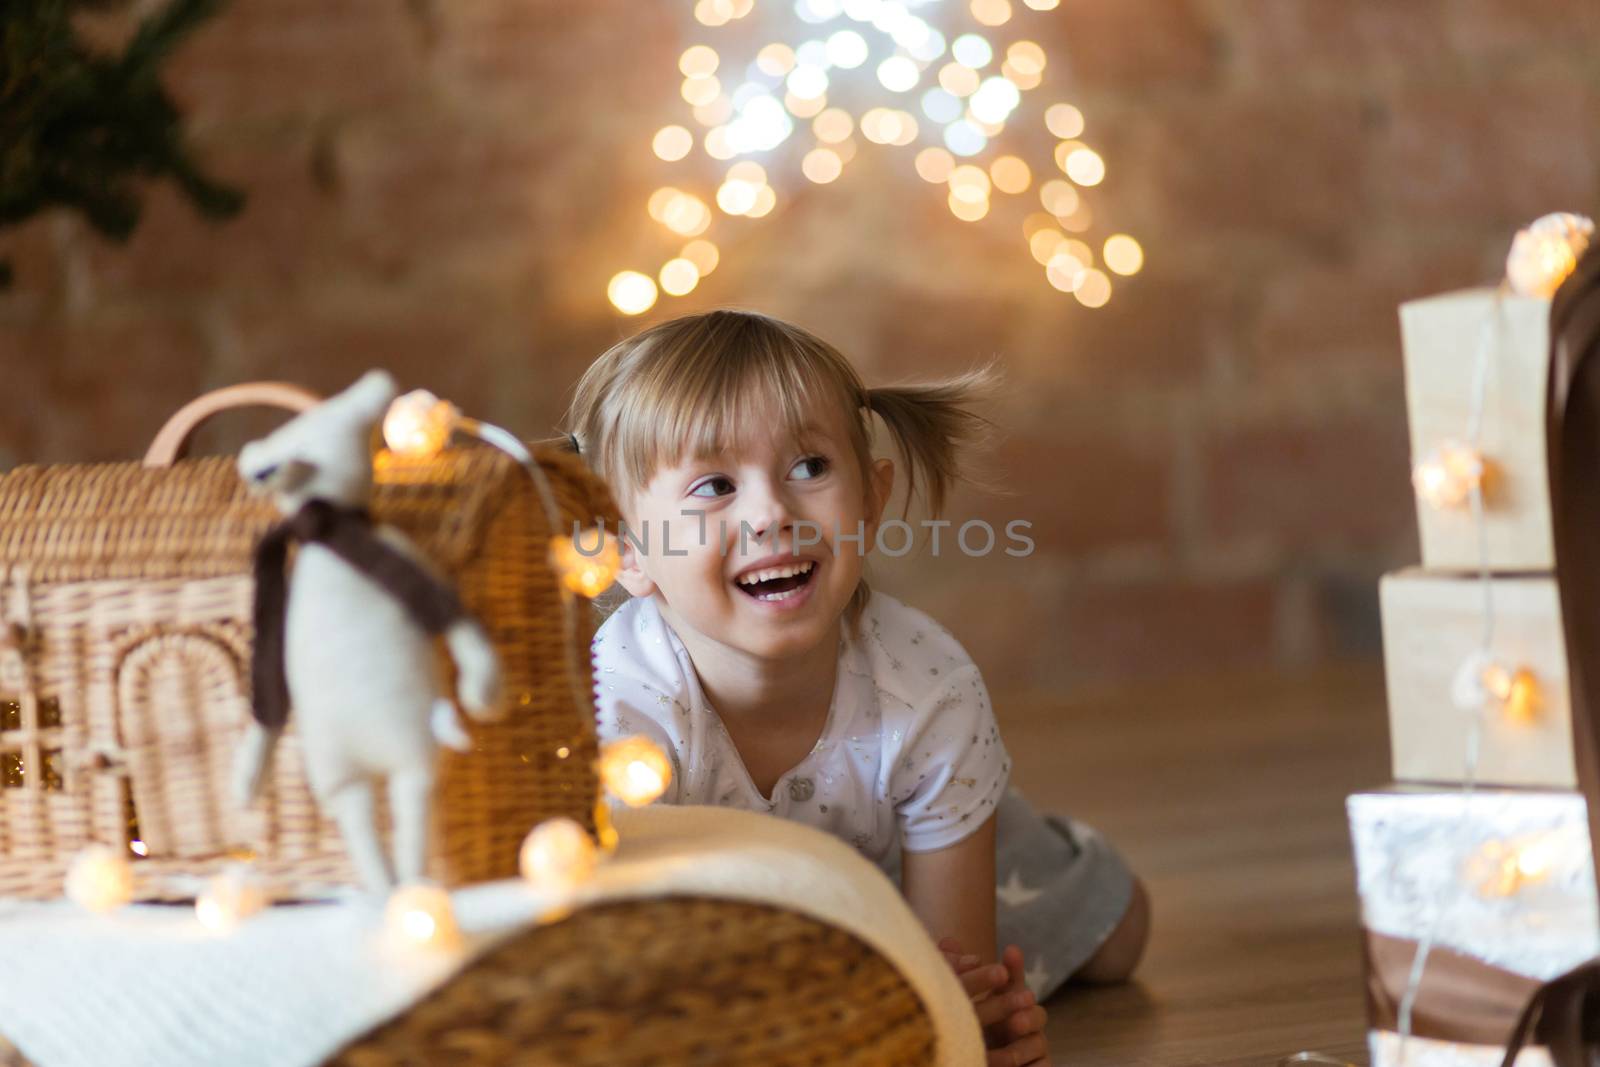 .Cute little girl sitting on the floor among the new year garlands by galinasharapova